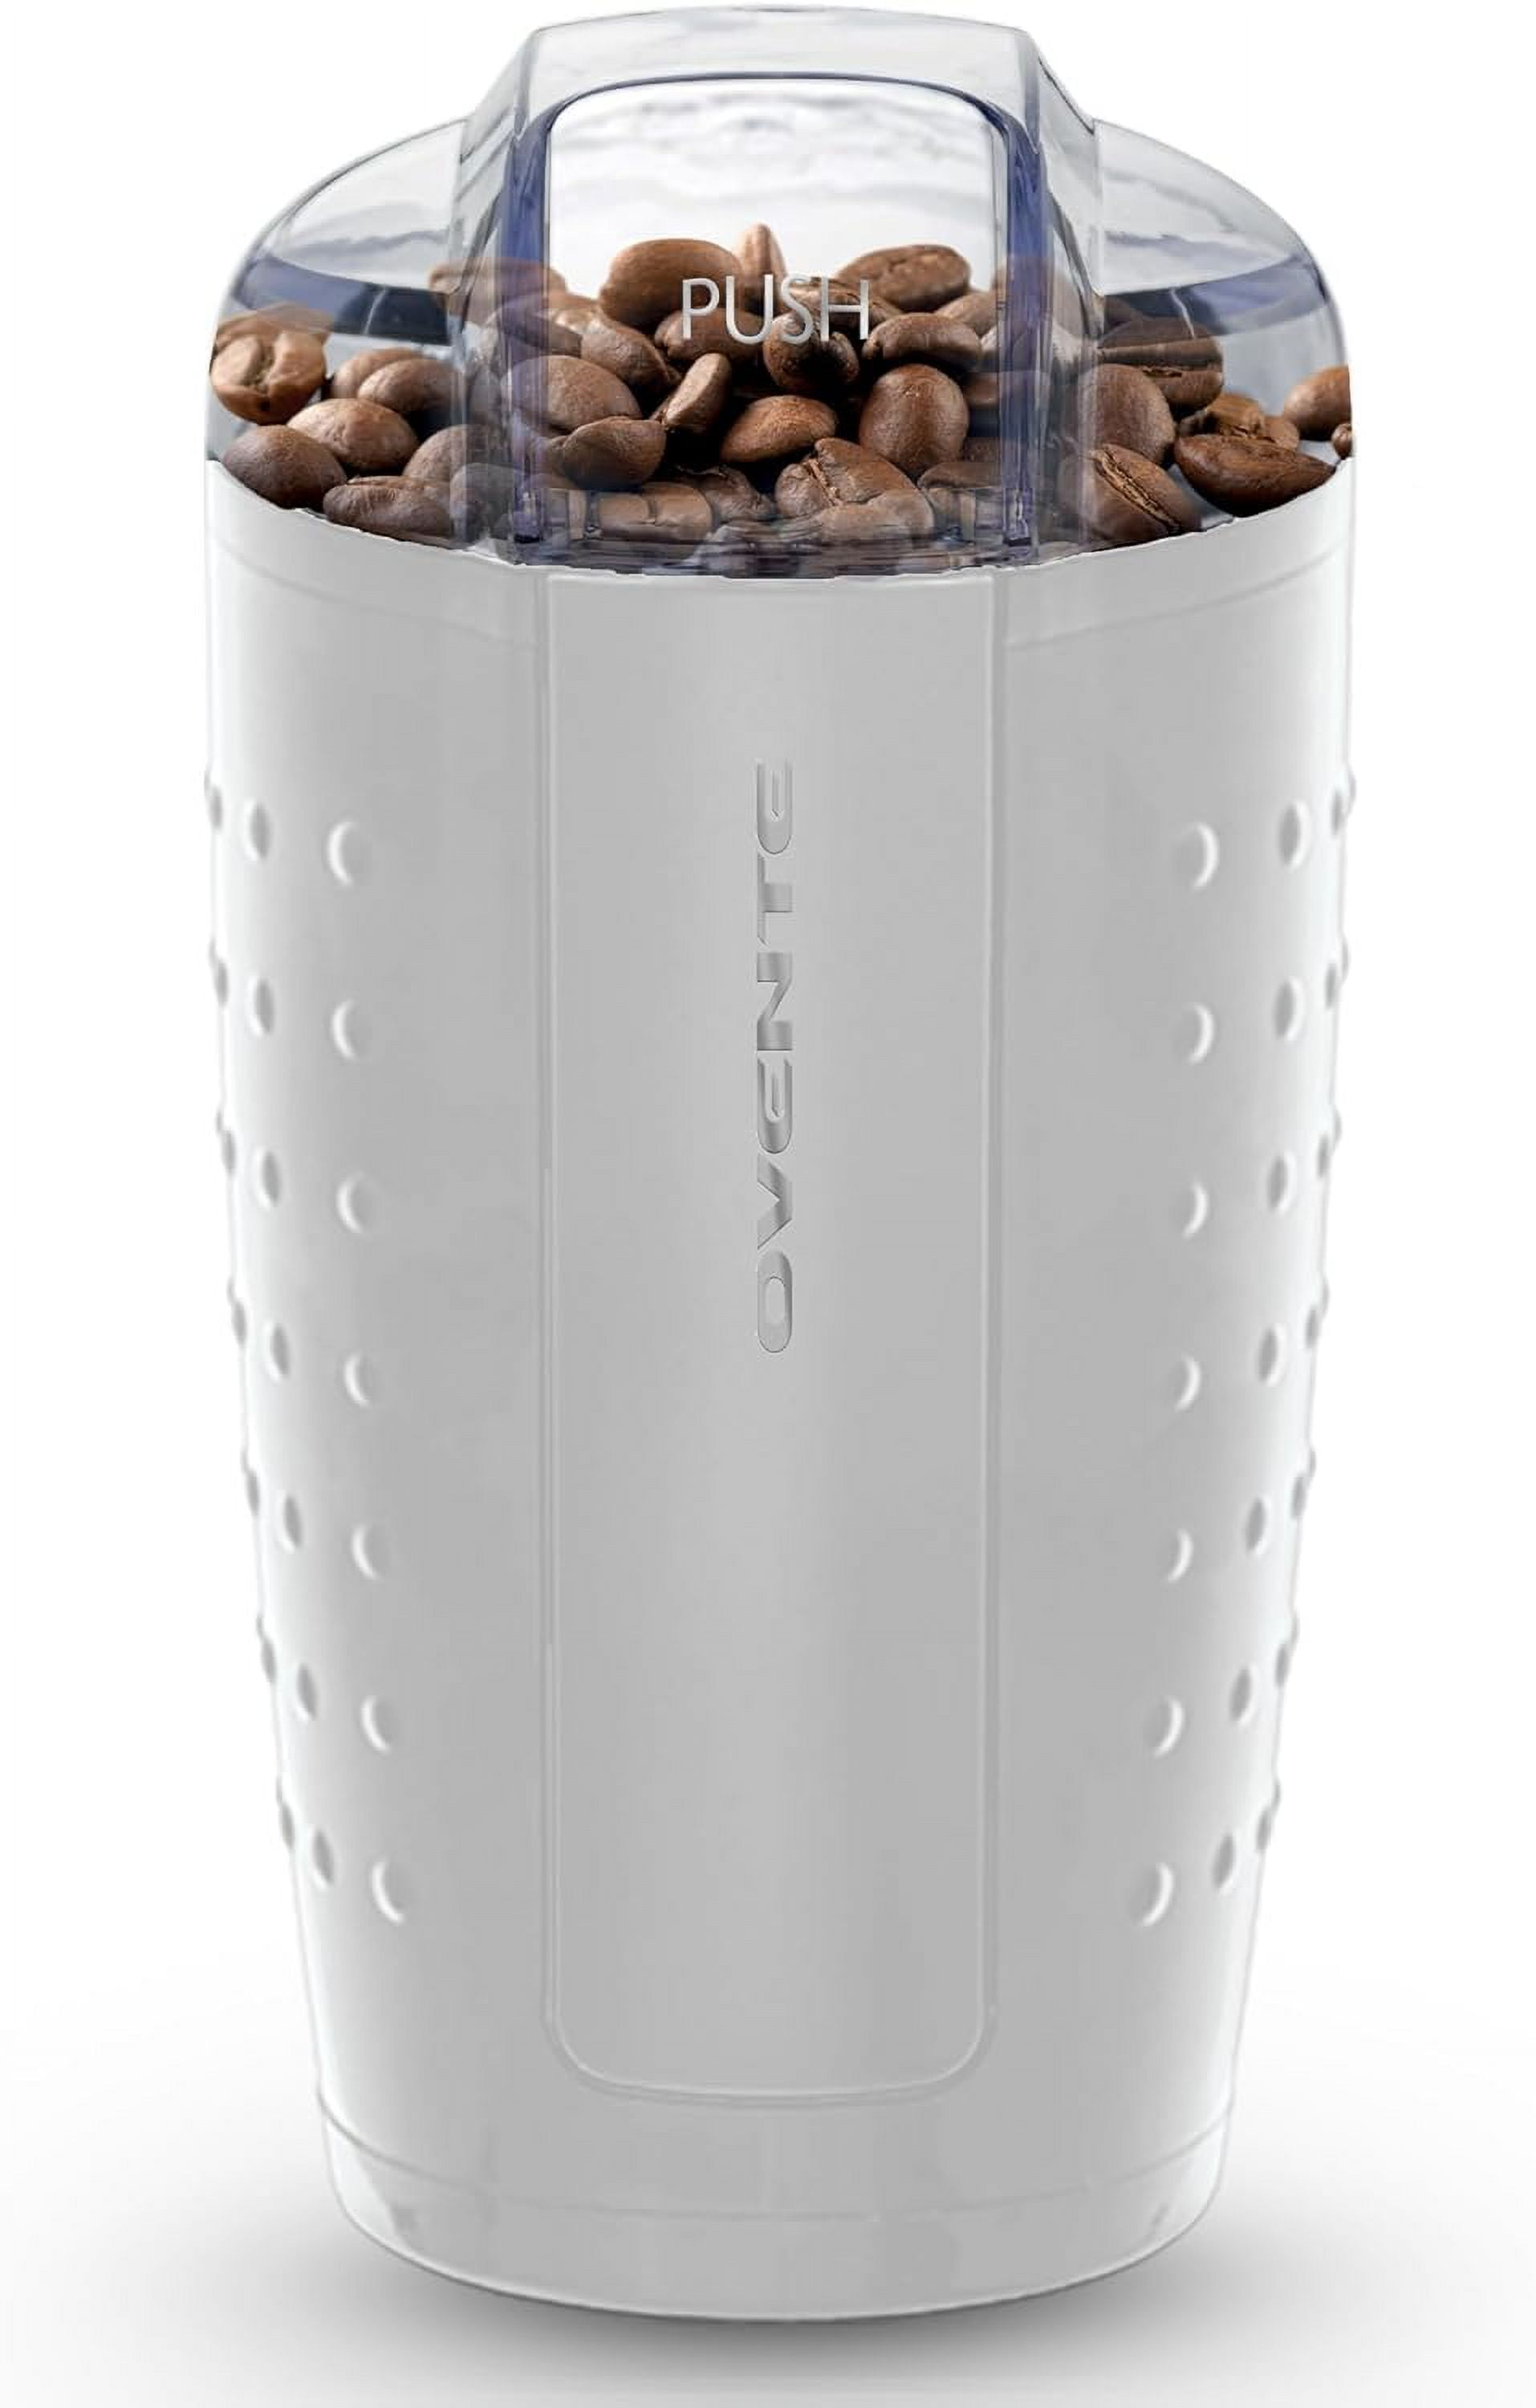 ChefGiant Travel Coffee Grinder & Pour Over Maker, Insulated Stainless